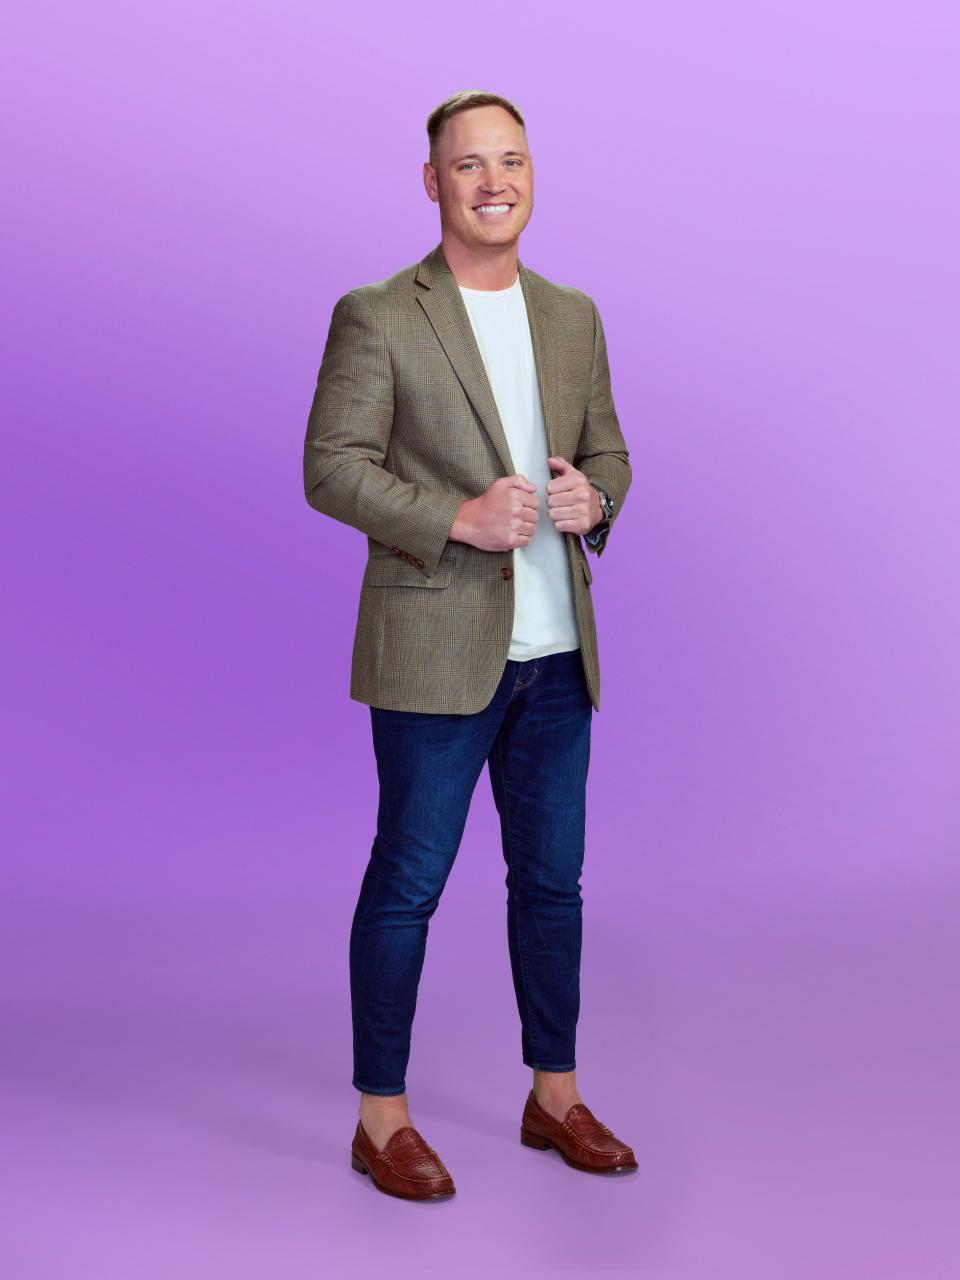 Jimmy, a candidate at "Love is blind" Season 6, wearing a beige jacket and jeans